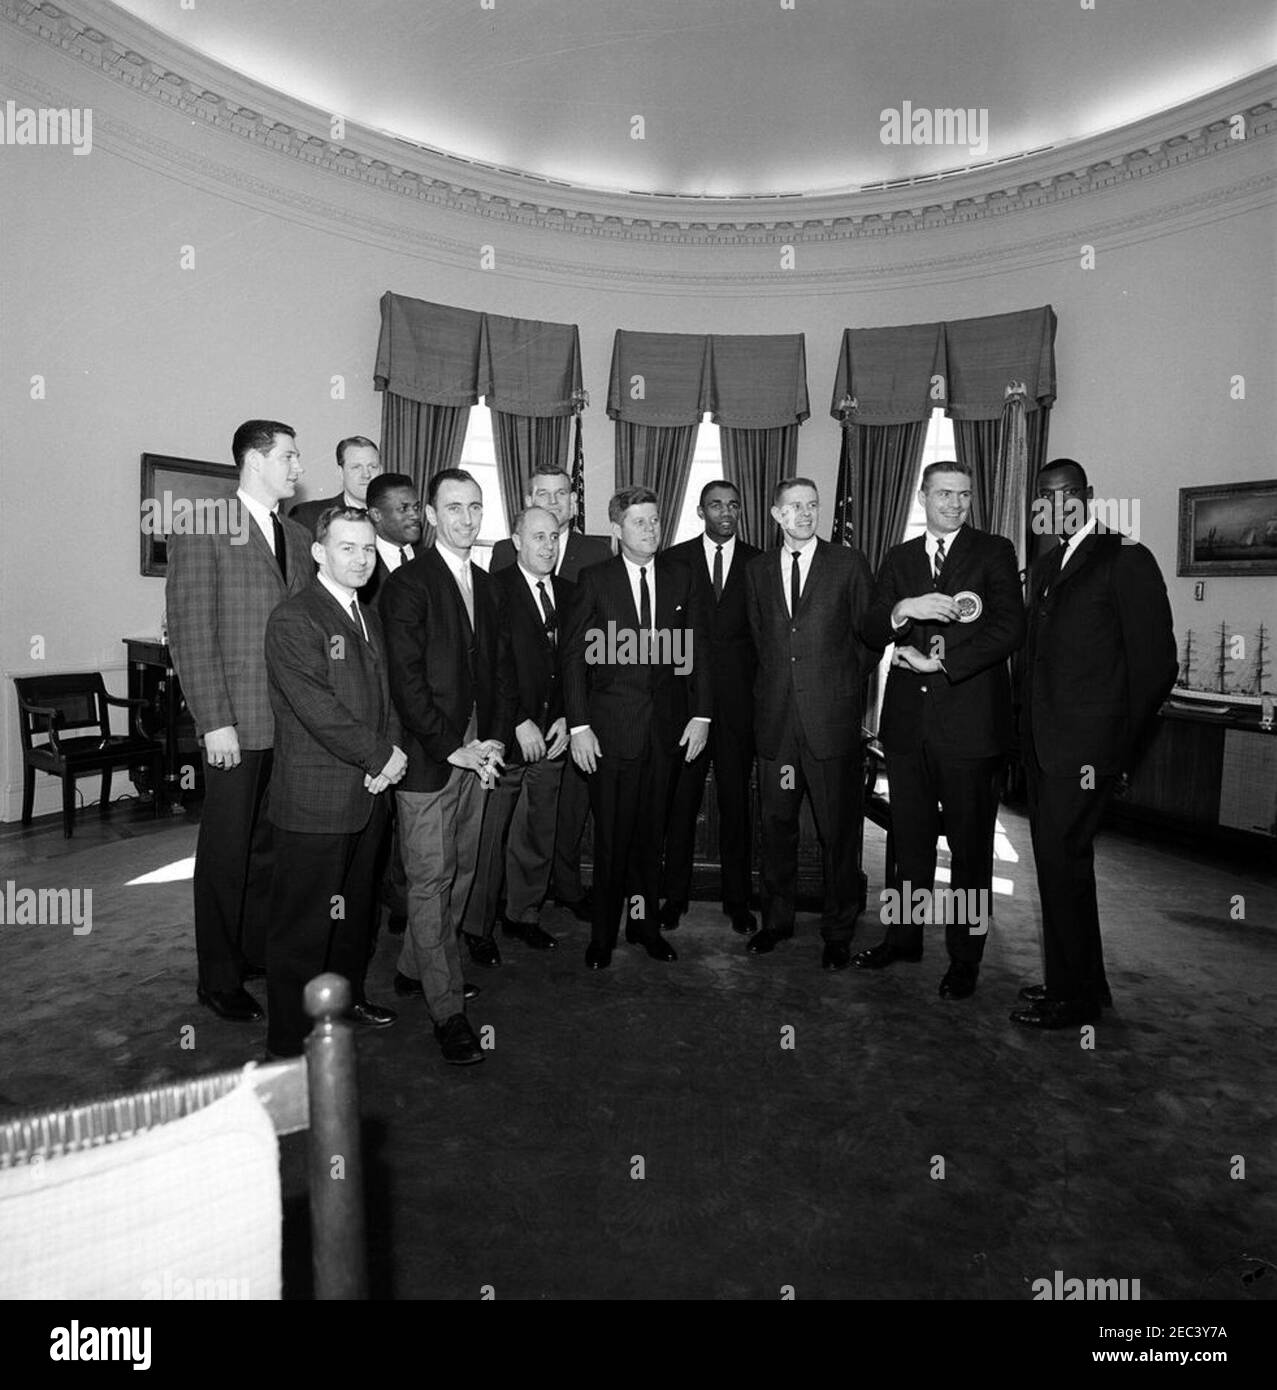 Visit of the Boston Celtics basketball team, 1:00PM. Members of the  National Basketball Association (NBA) Boston Celtics team visit with  President John F. Kennedy in the Oval Office during a tour of